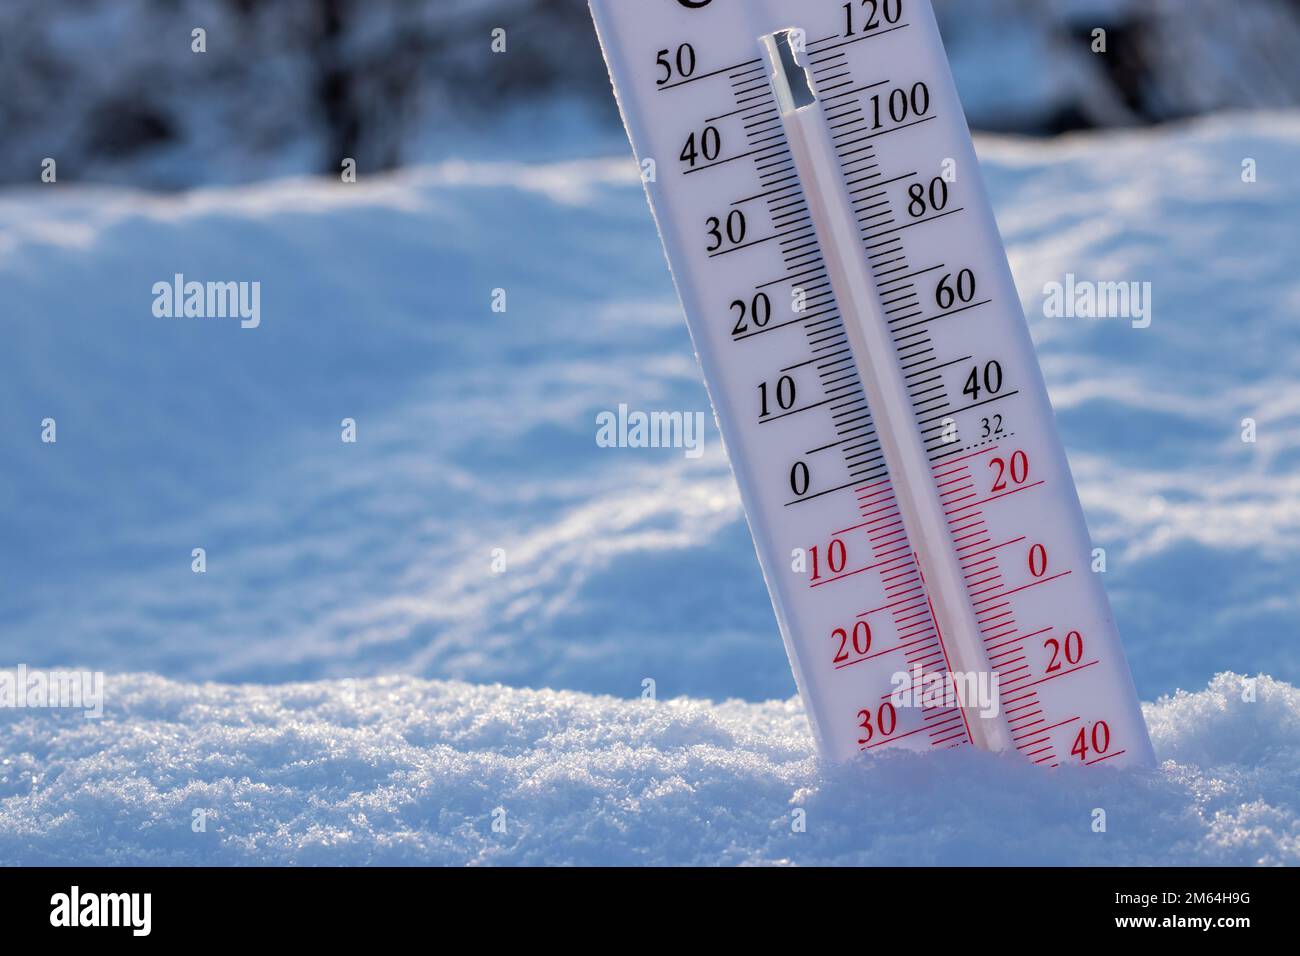 https://c8.alamy.com/comp/2M64H9G/thermometer-in-the-snow-extreme-cold-temperature-at-winter-2M64H9G.jpg